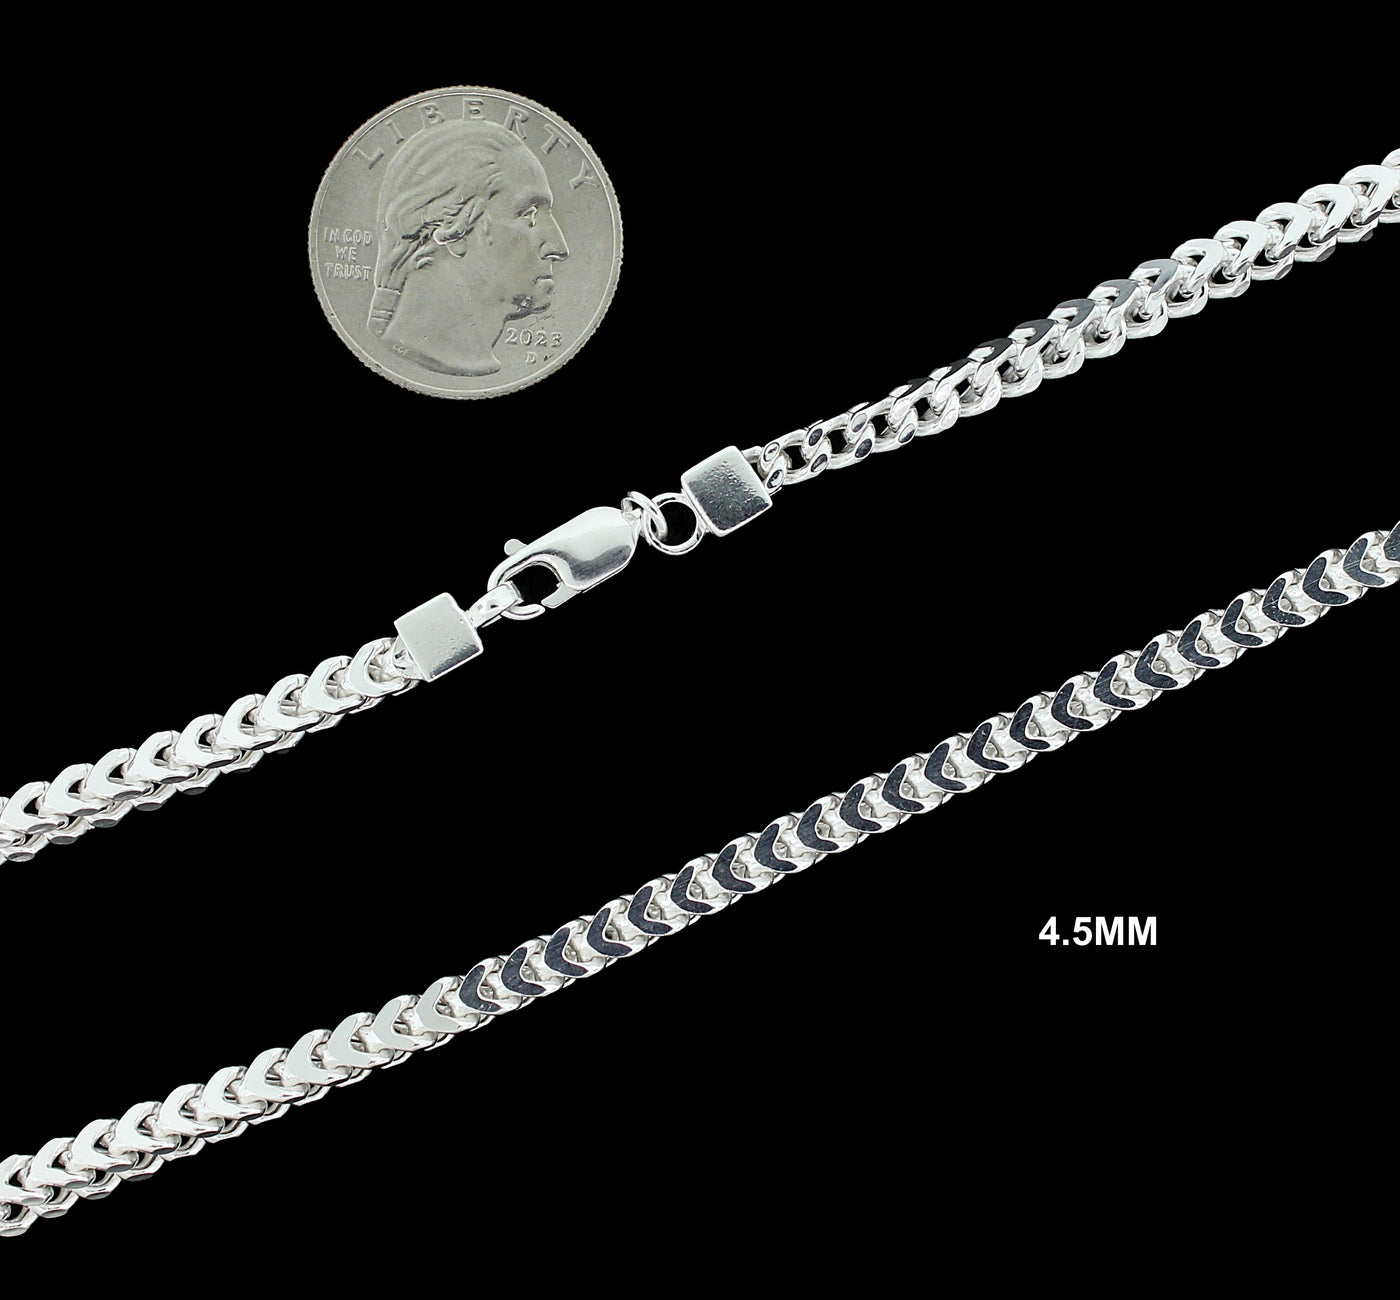 Real 4.5MM Solid 925 Sterling Silver Italian FRANCO LINK CHAIN Necklace UNISEX